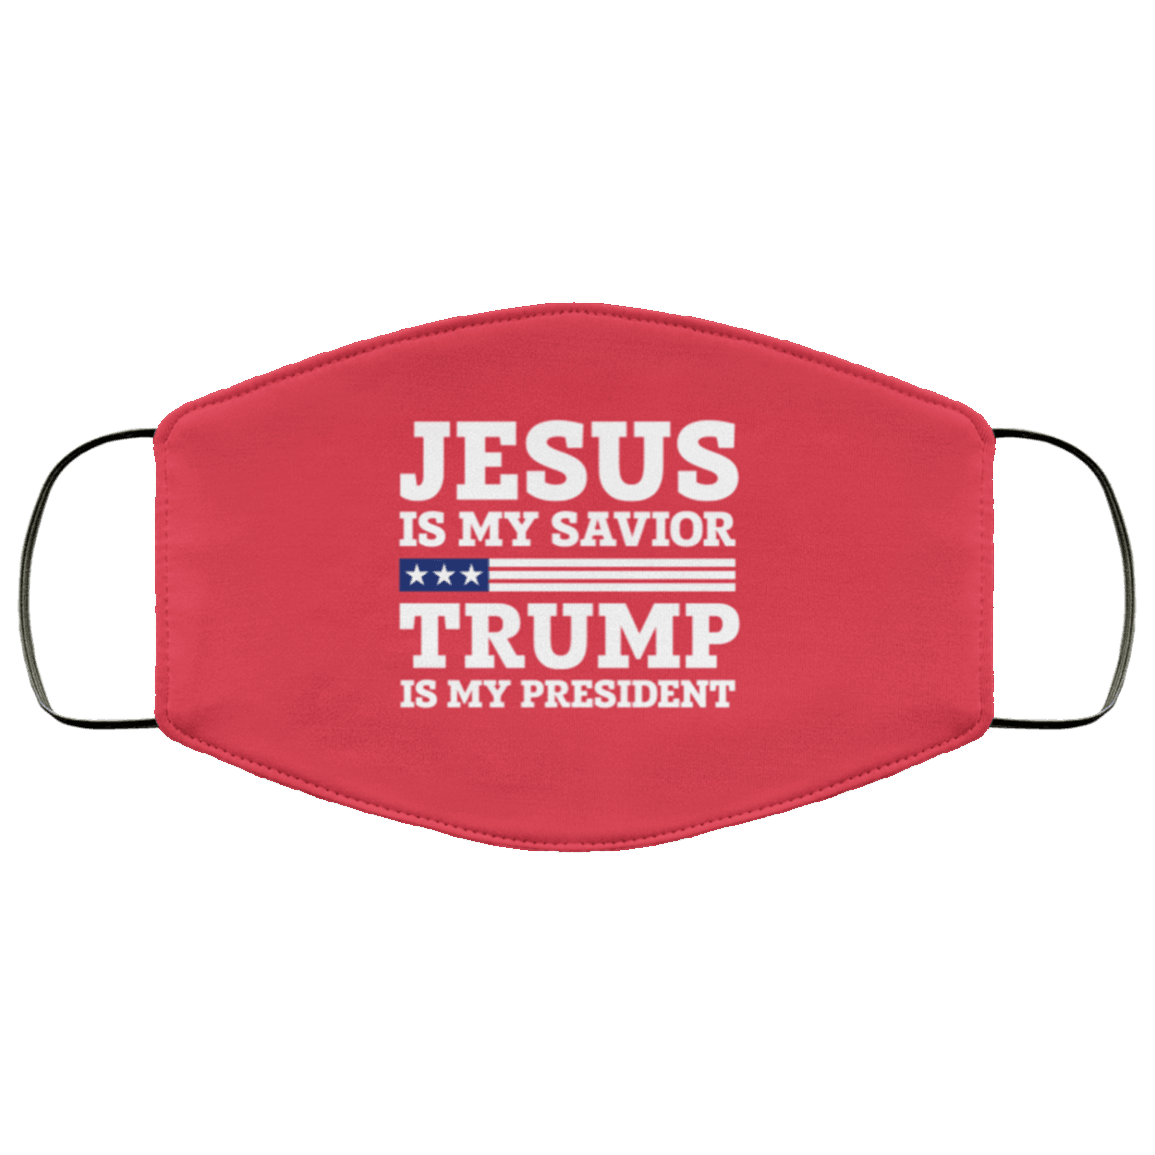 Designs by MyUtopia Shout Out:Jesus Is My Savior Trump is My President Adult Fabric Face Mask with Elastic Ear Loops,3Layer Fabric Face Mask / Red / Adult,Fabric Face Mask